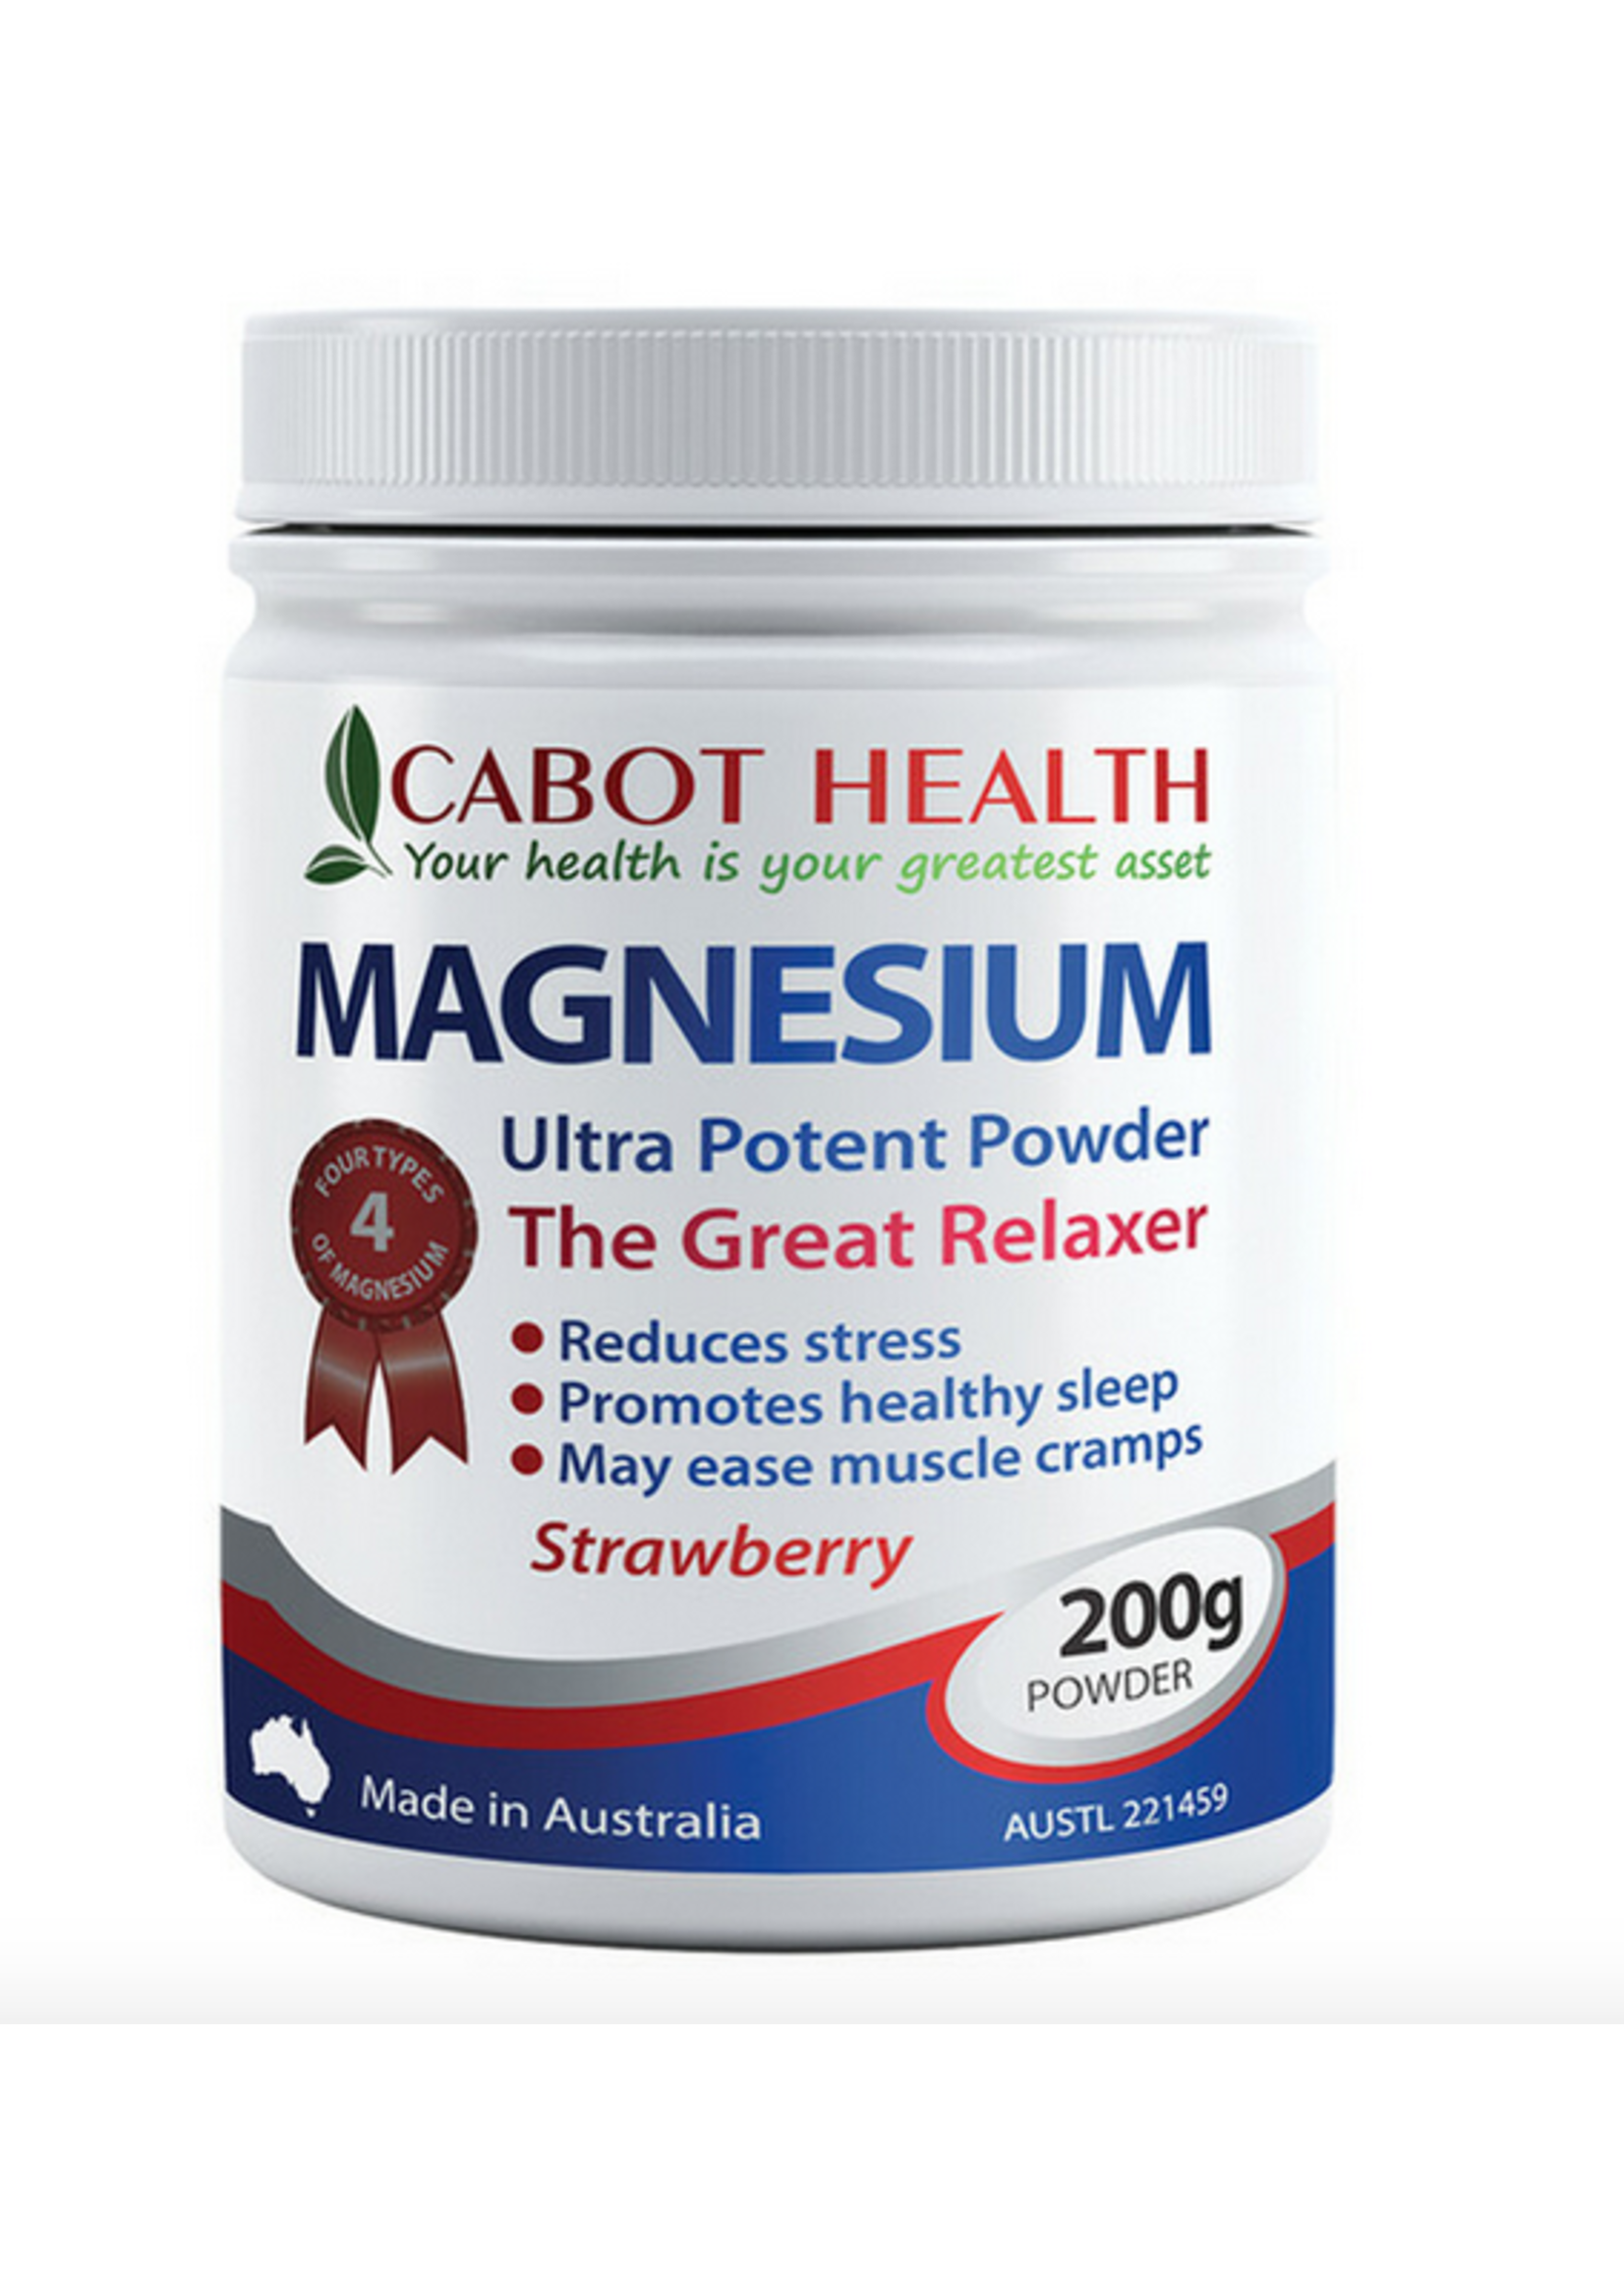 Cabot Health Cabot Health Magnesium Ultra Potent Powder Strawberry 200gms